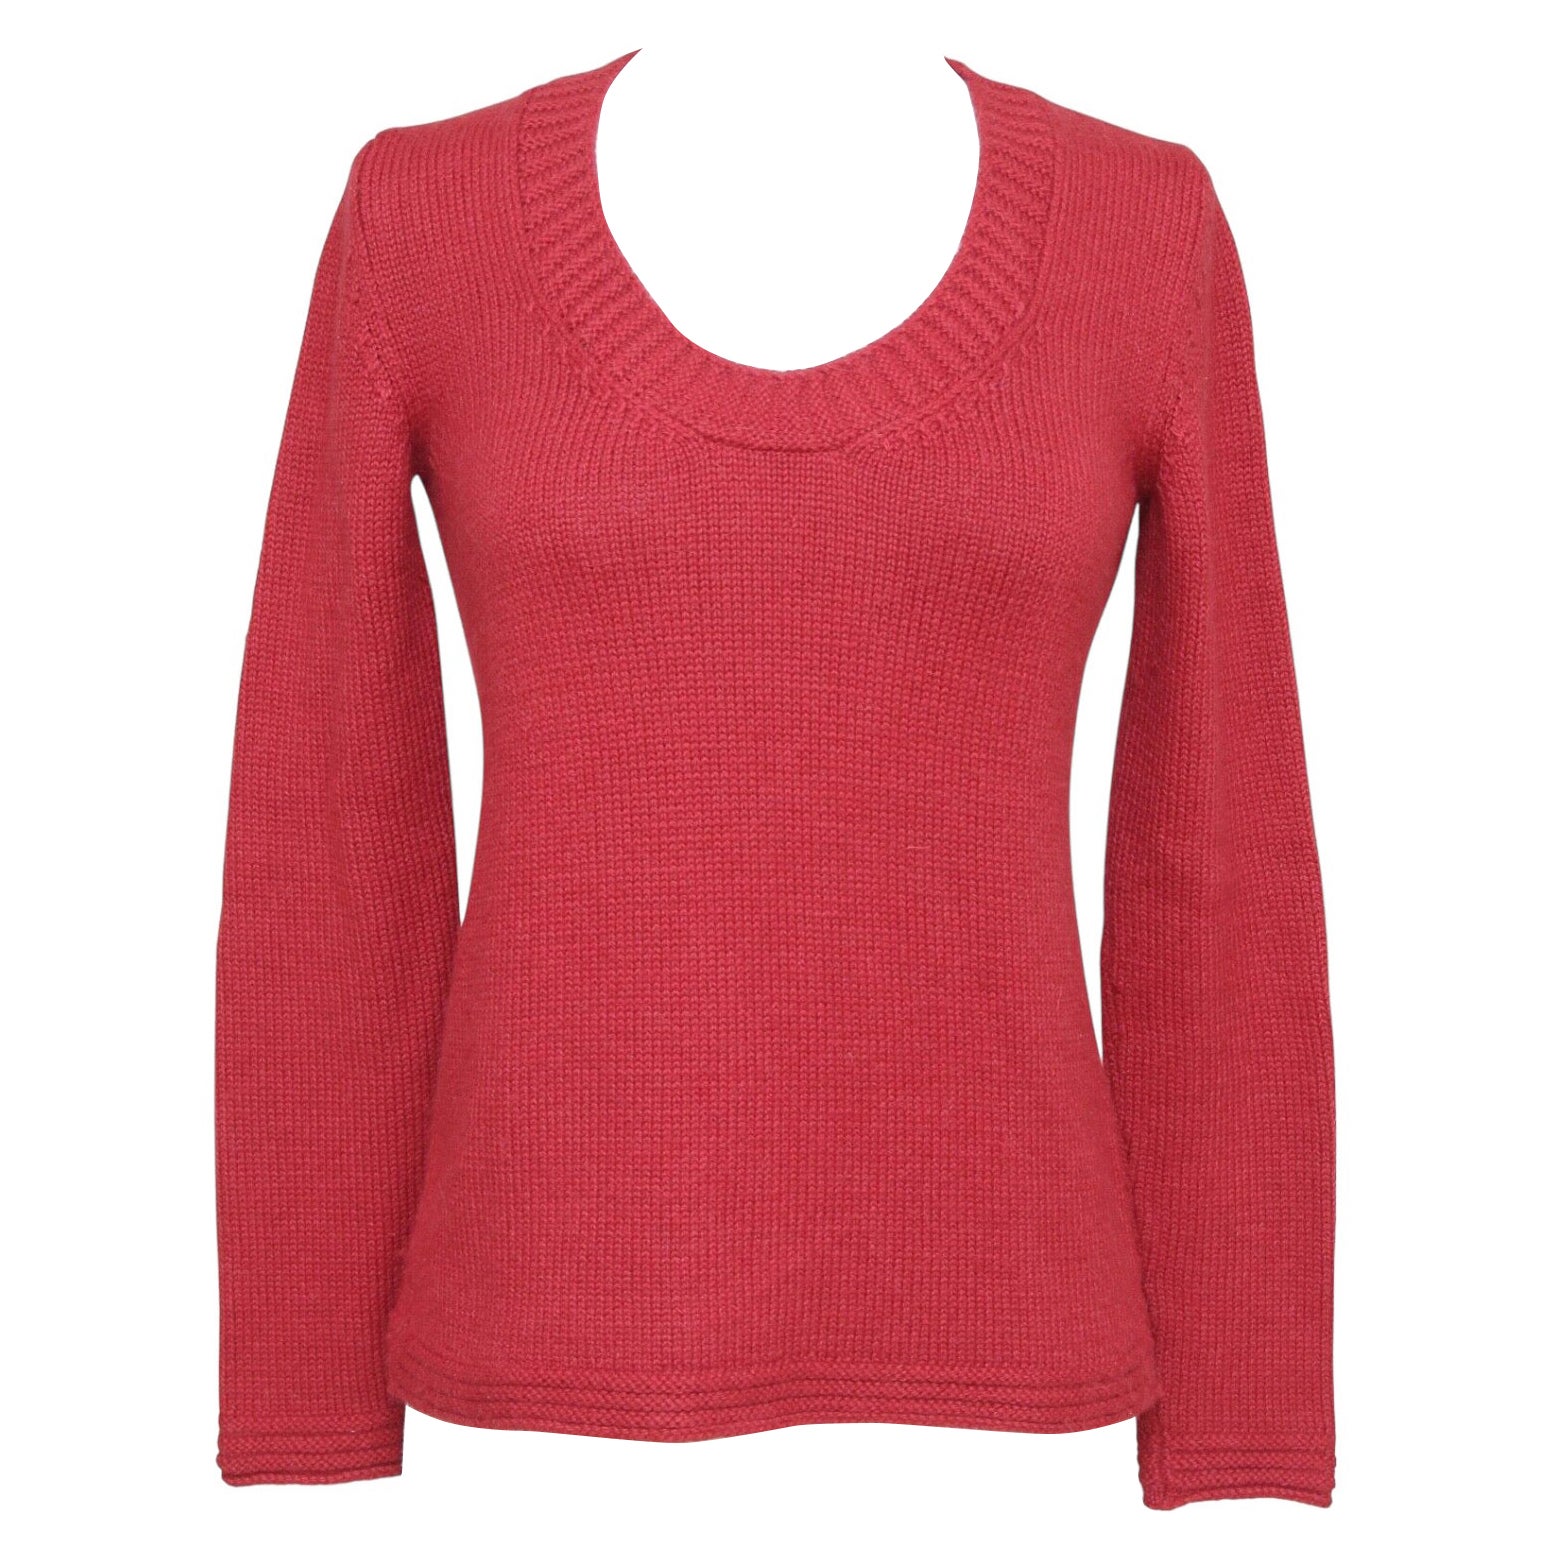 CHLOE Sweater Knit Top Shirt Long Sleeve Red Alpaca Scoop Neck Sz XS For Sale